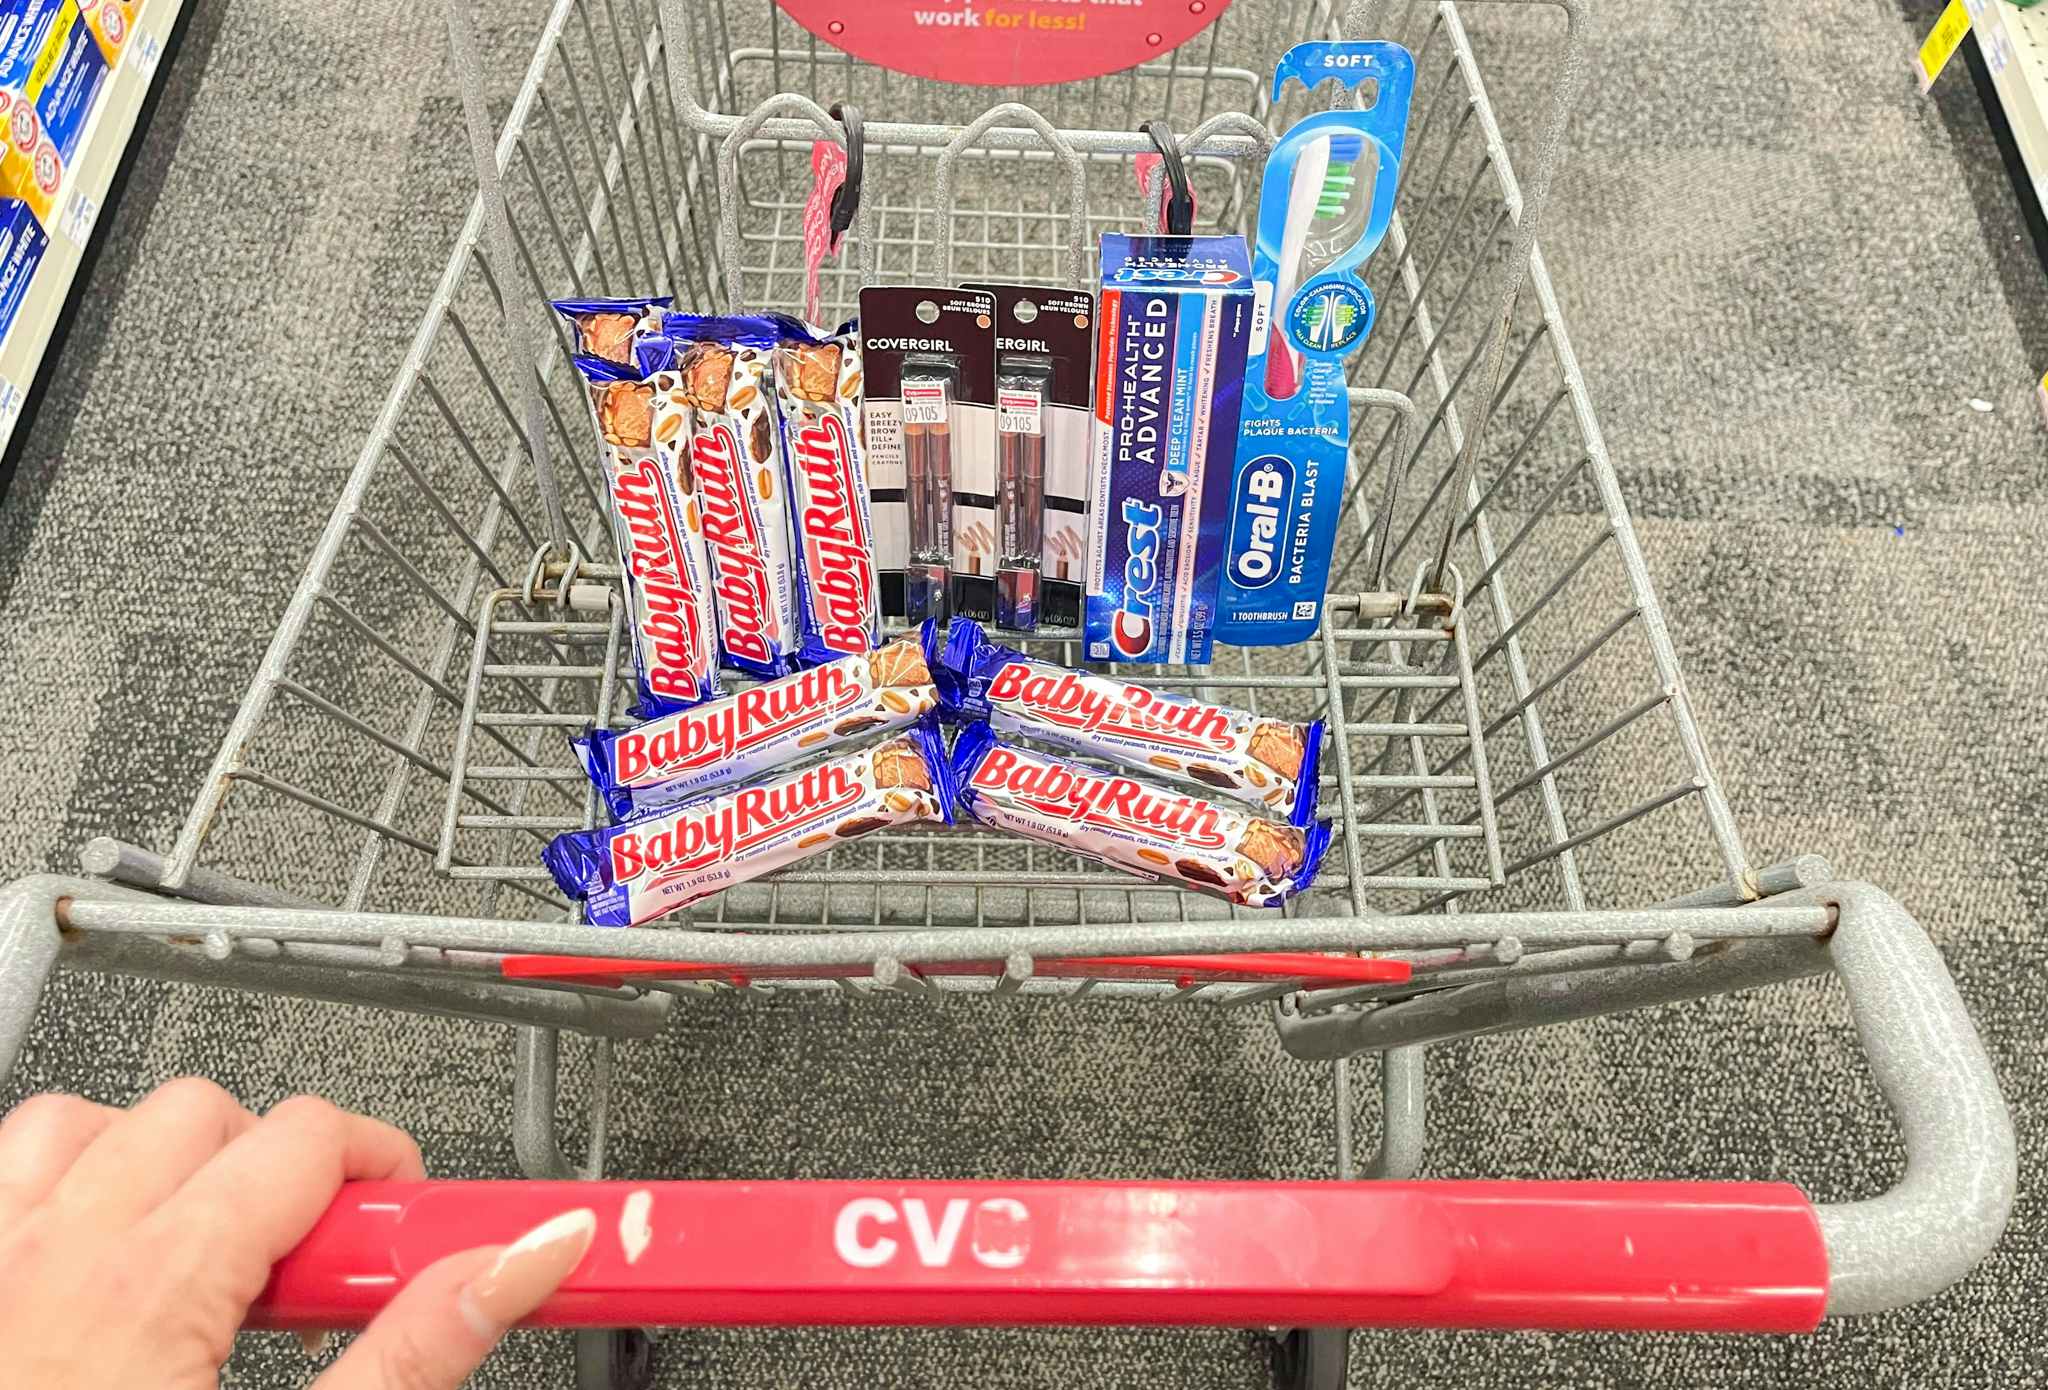 baby ruth, covergirl, crest, and oral-b in cvs shopping cart